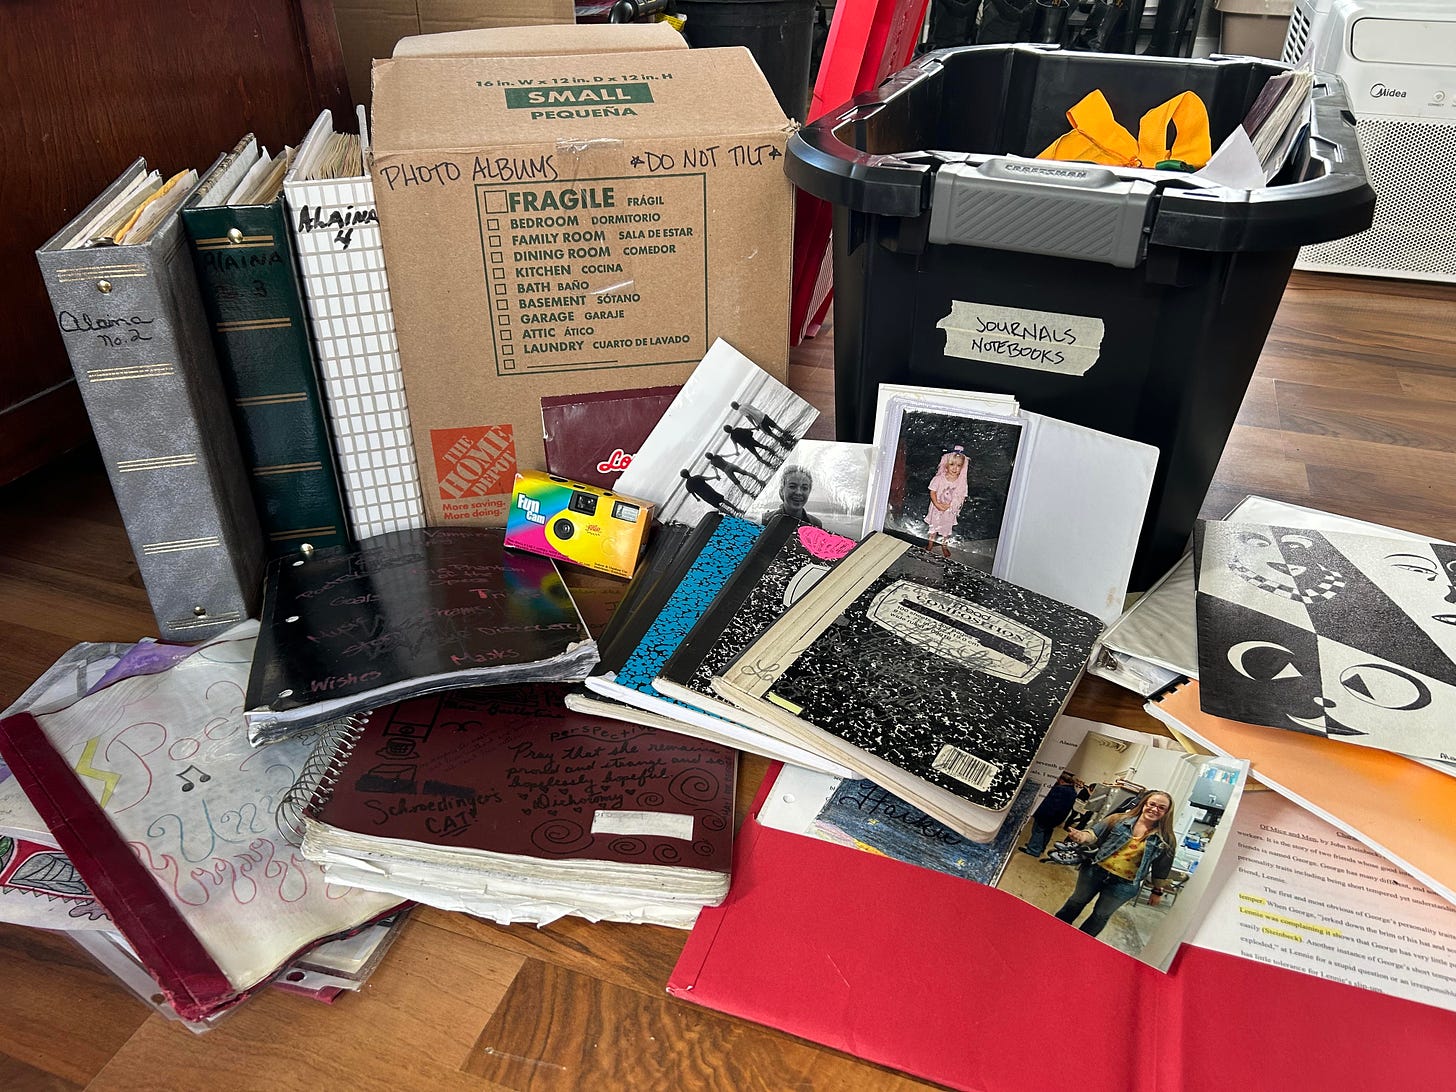 An artfully arranged but messy pile of personal ephemera (including old photo albums, spiral bound notebooks, composition books with scribbled covers, geometric art, handwritten poetry, and a disposable camera) scattered in front of a cardboard box labeled "PHOTO ALBUMS *DO NOT TILT*" and a plastic tub labeled "JOURNALS NOTEBOOKS.".